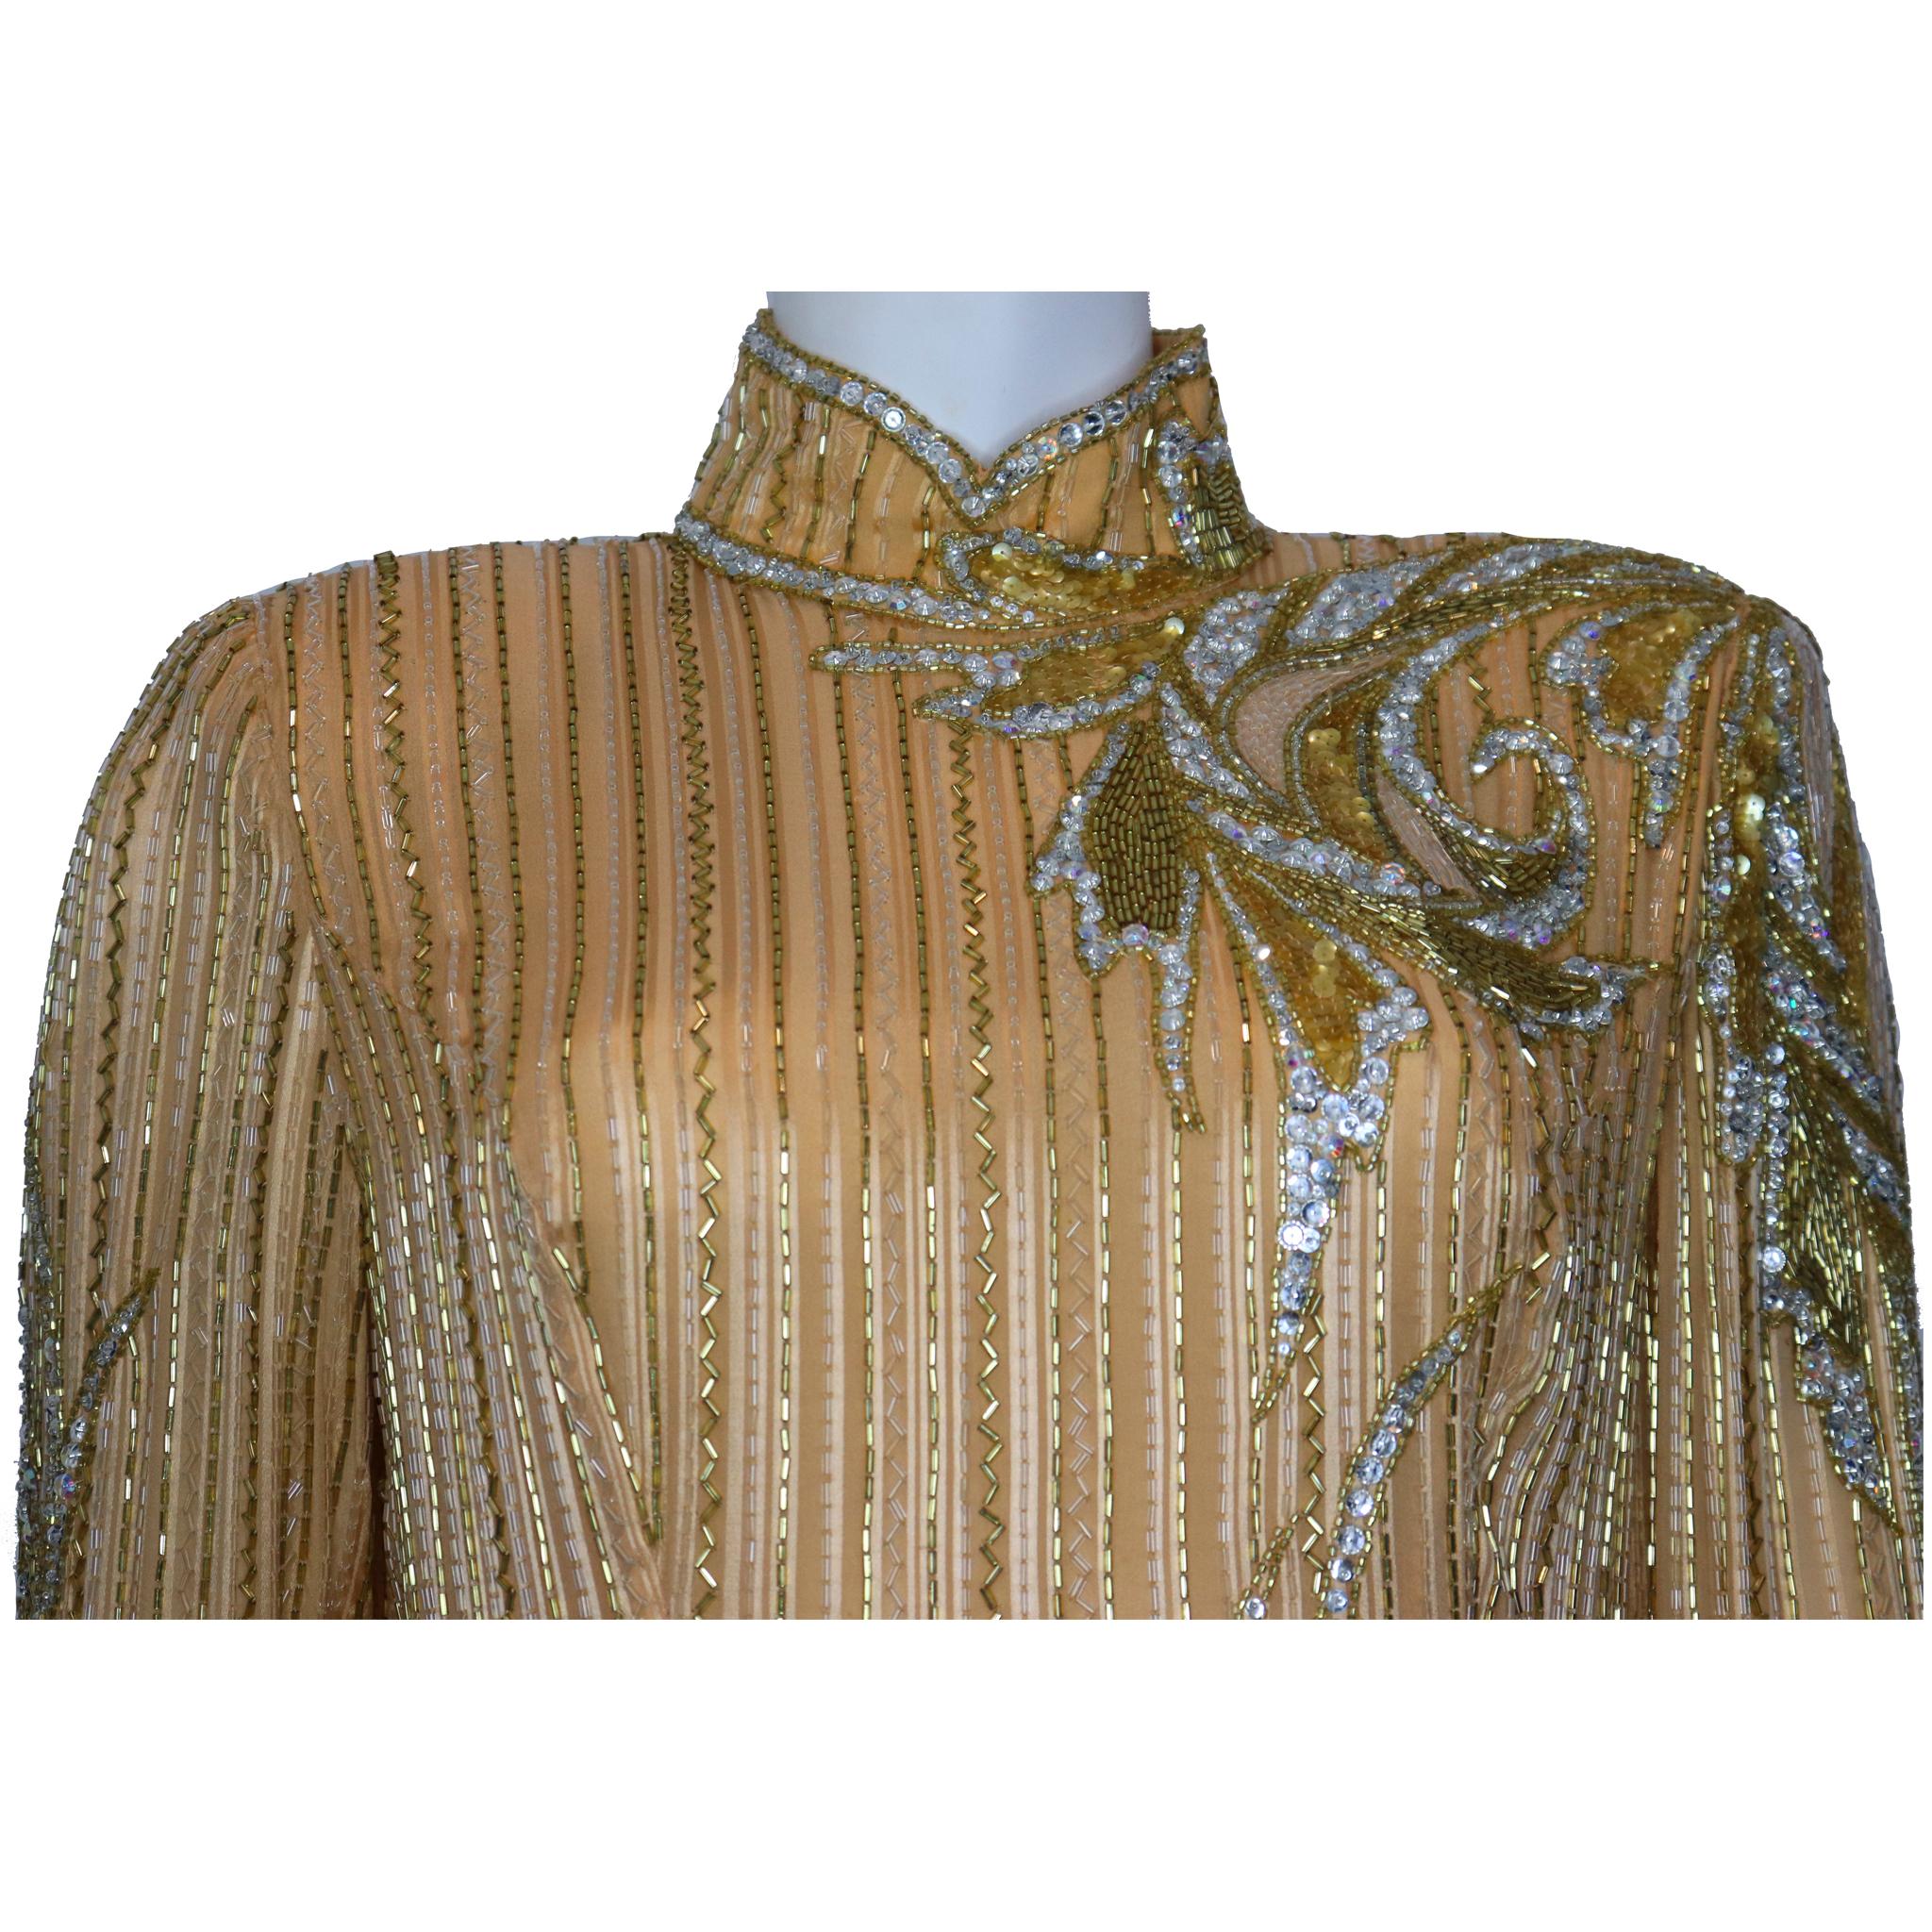 Bob Mackie High Collar Long Sleeve Gold Beaded Gown Circa 1990s. In excellent condition 

Measurements - 

Size 12 
Bust: 38